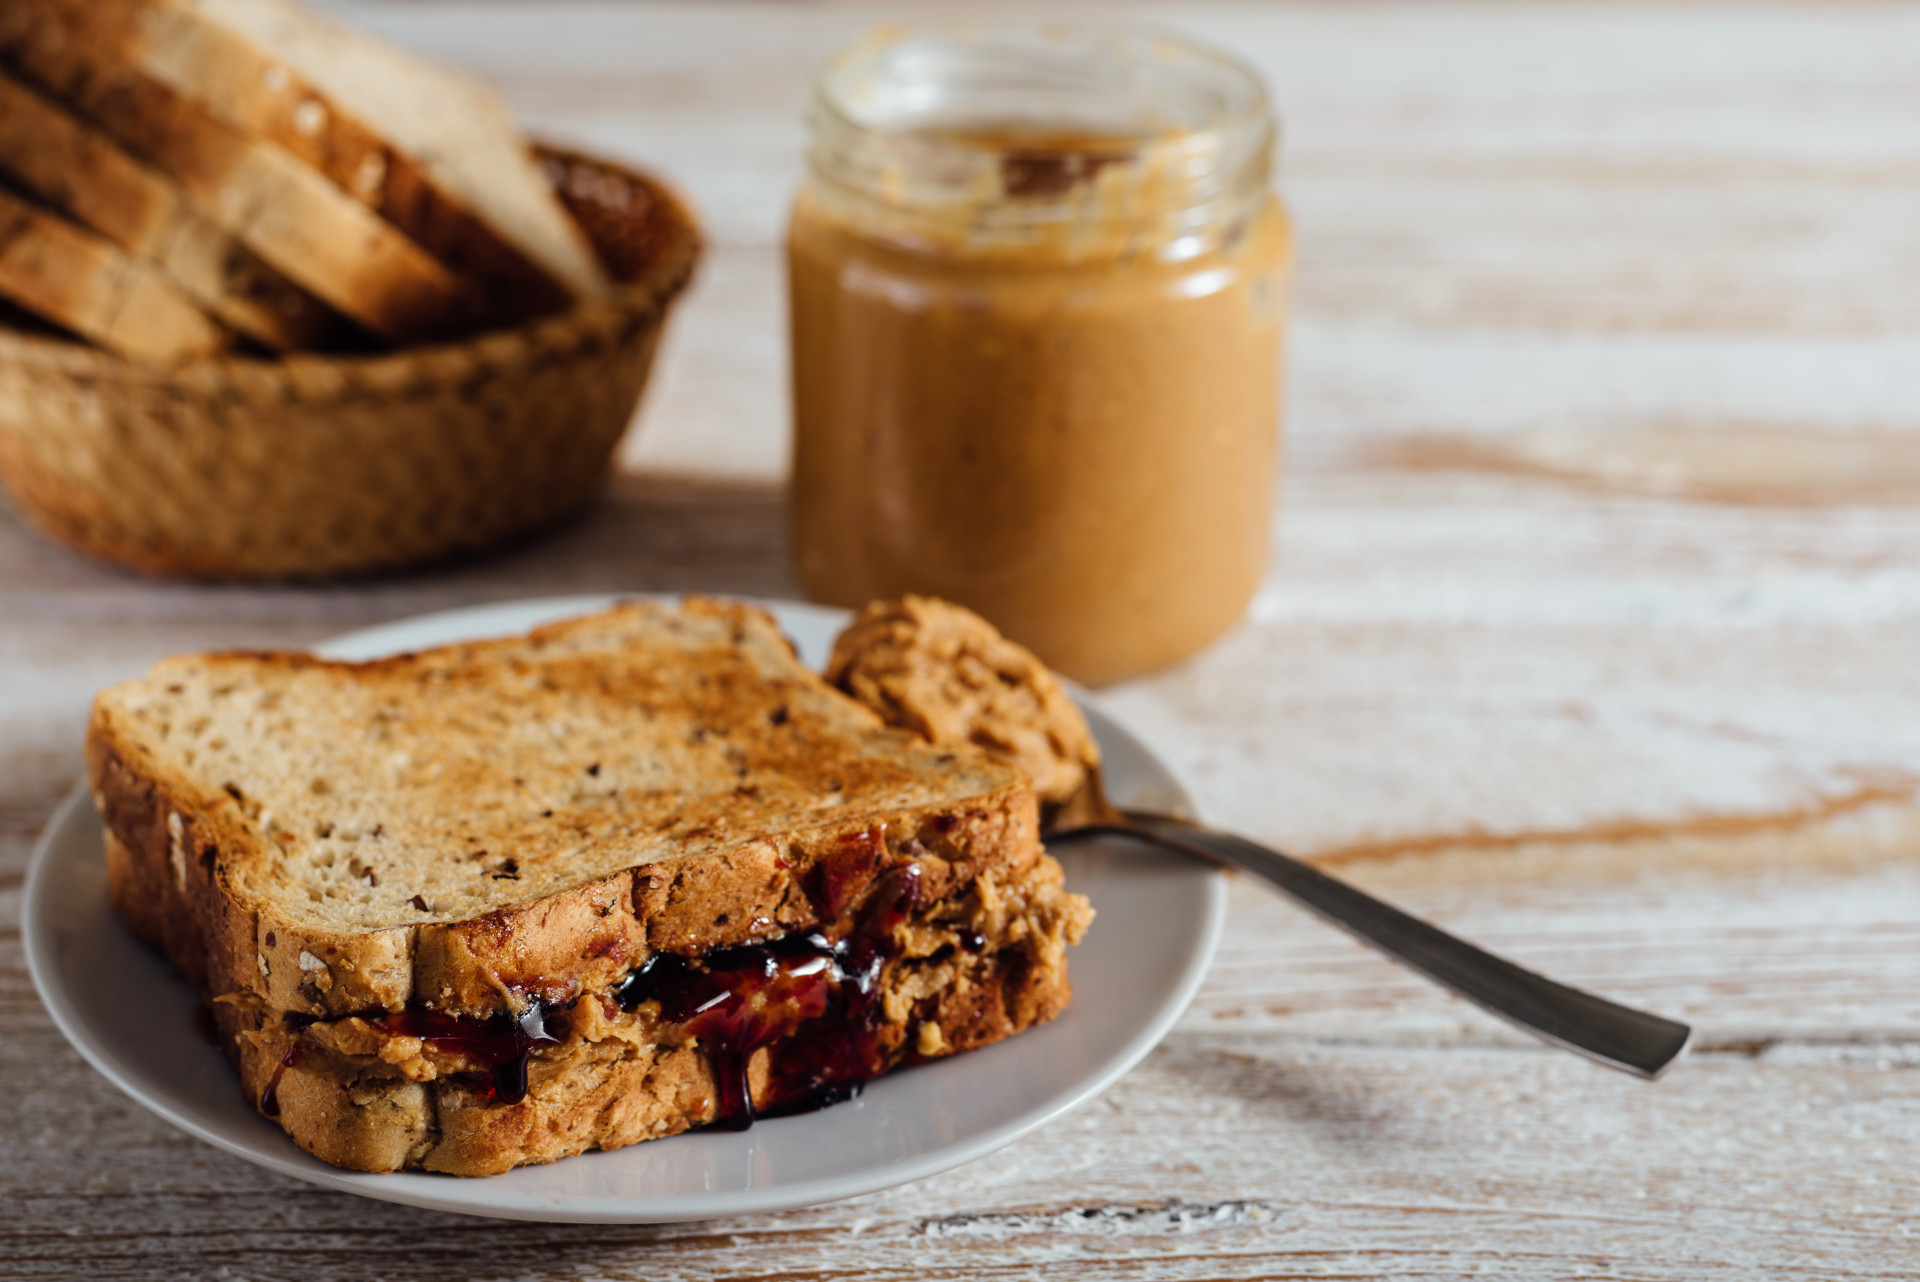 There's nothing more satisfying than a PB&J sandwich. Wholegrain bread is even more hearty, and it won't get too soggy. Just check for allergies first!<p><a href="https://www.msn.com/en-us/community/channel/vid-7xx8mnucu55yw63we9va2gwr7uihbxwc68fxqp25x6tg4ftibpra?cvid=94631541bc0f4f89bfd59158d696ad7e">Follow us and access great exclusive content every day</a></p>